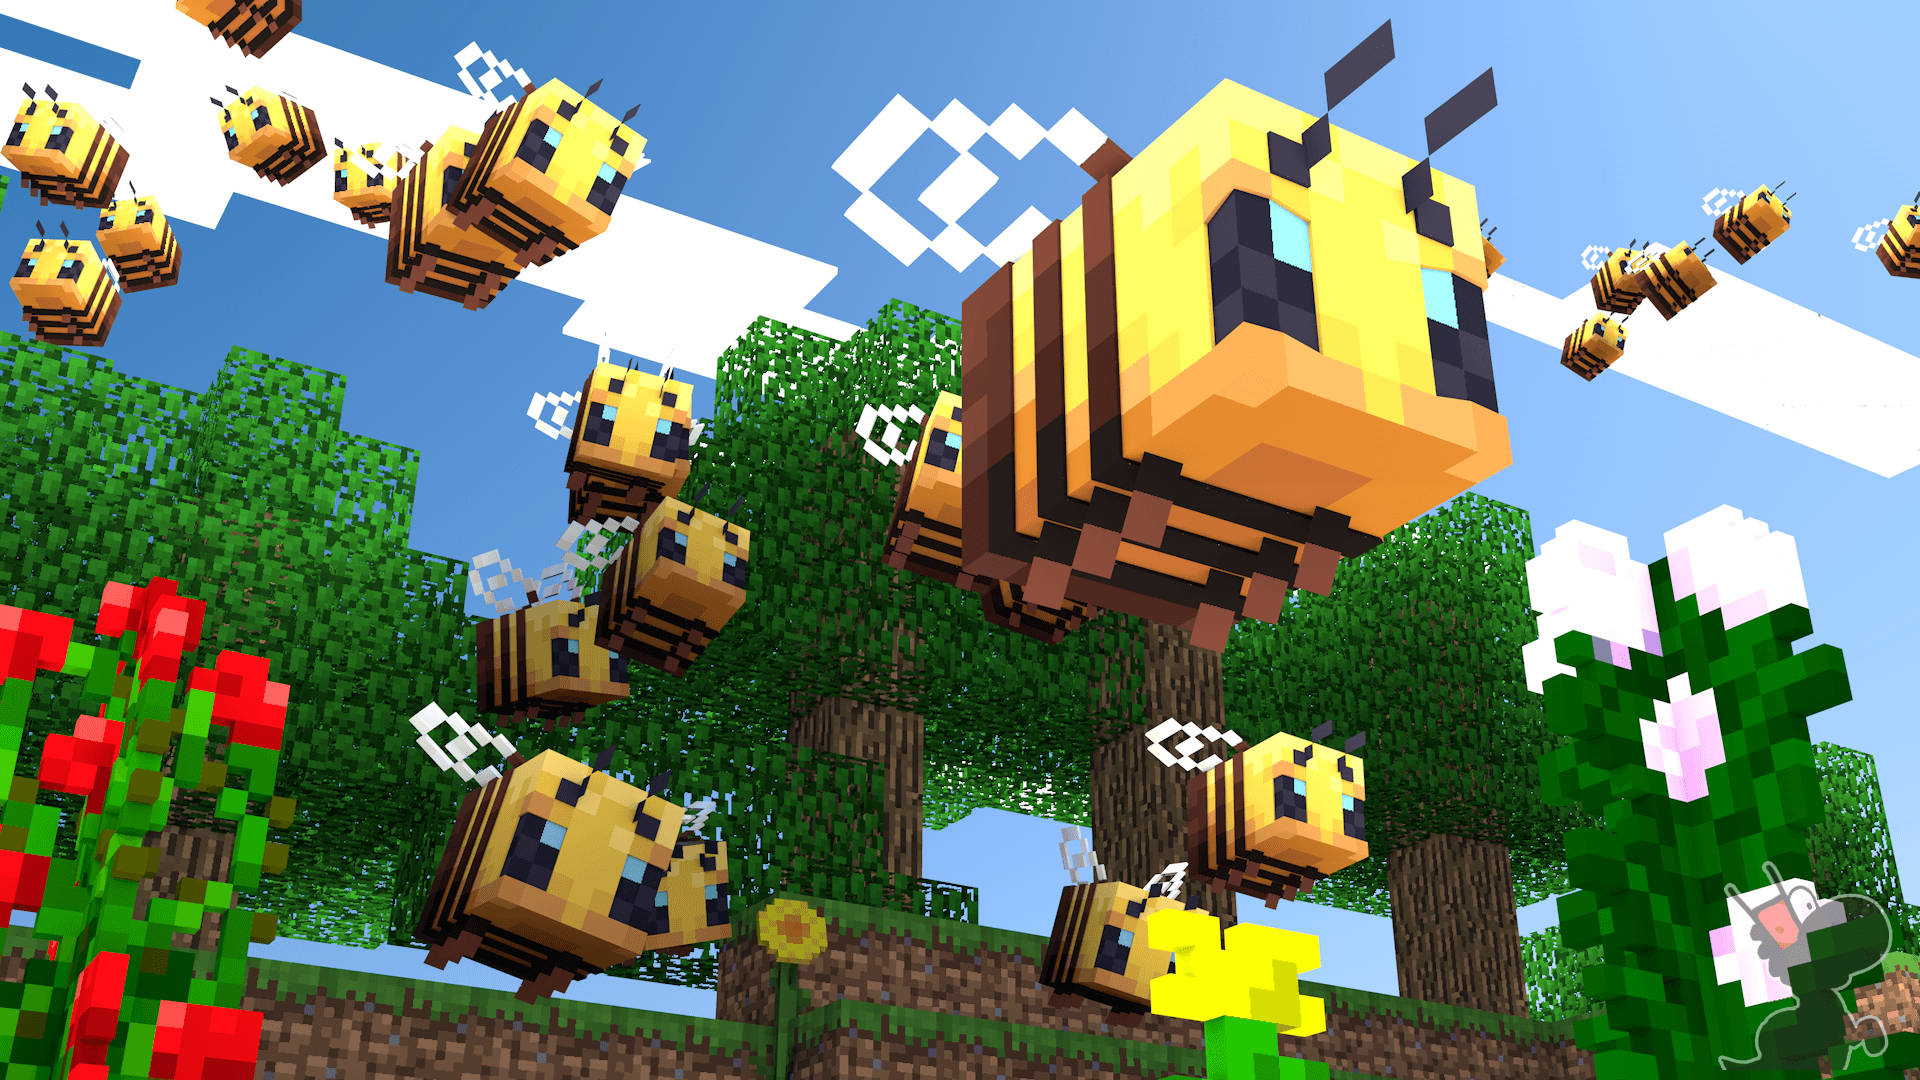 Free Minecraft Bee Wallpaper Downloads, [100+] Minecraft Bee Wallpapers for  FREE 